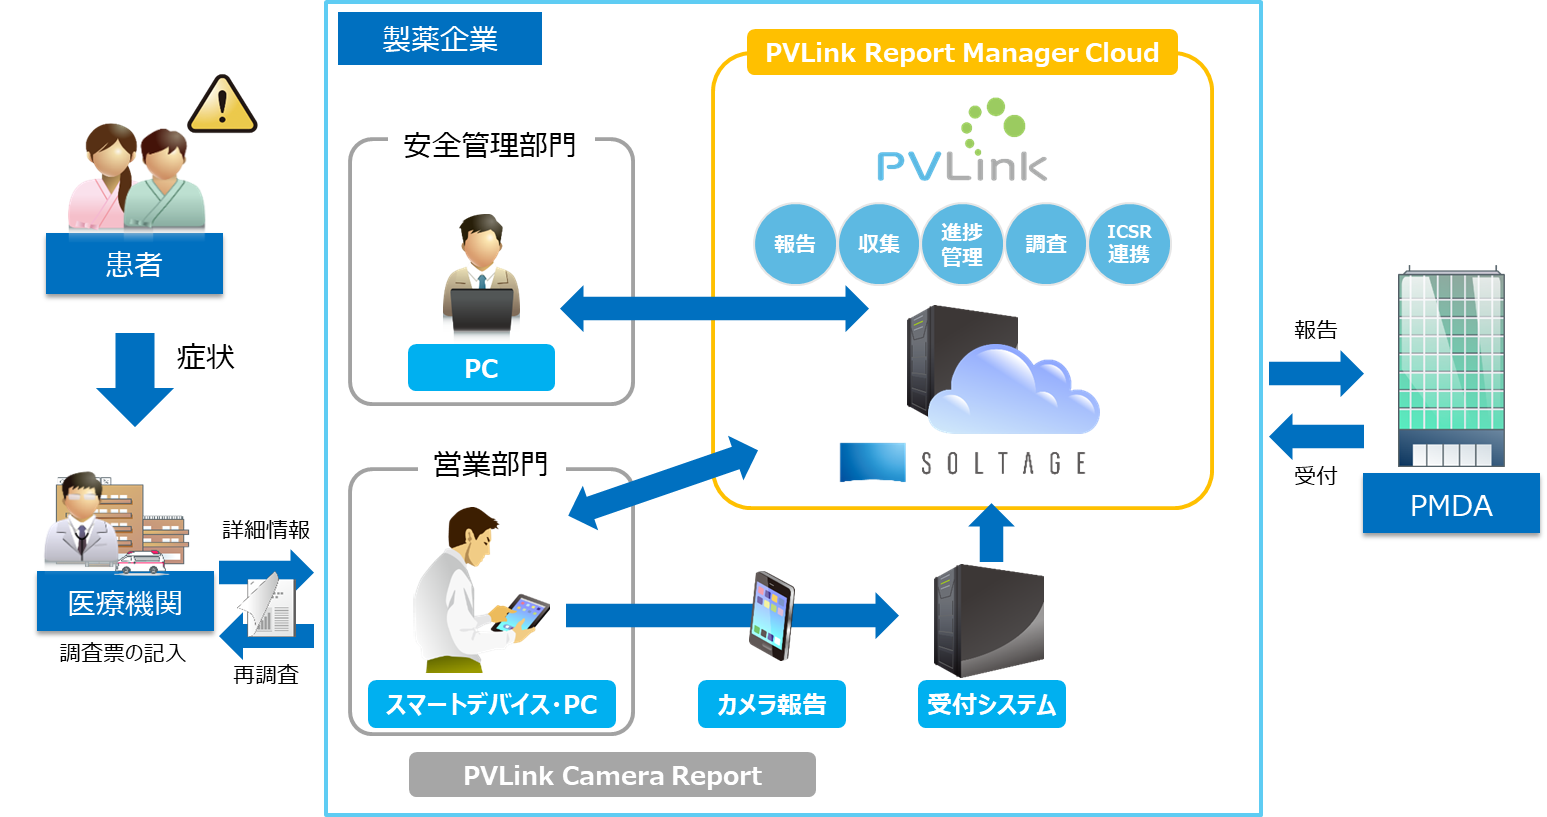 PVLink Report Manager Cloud 概要図